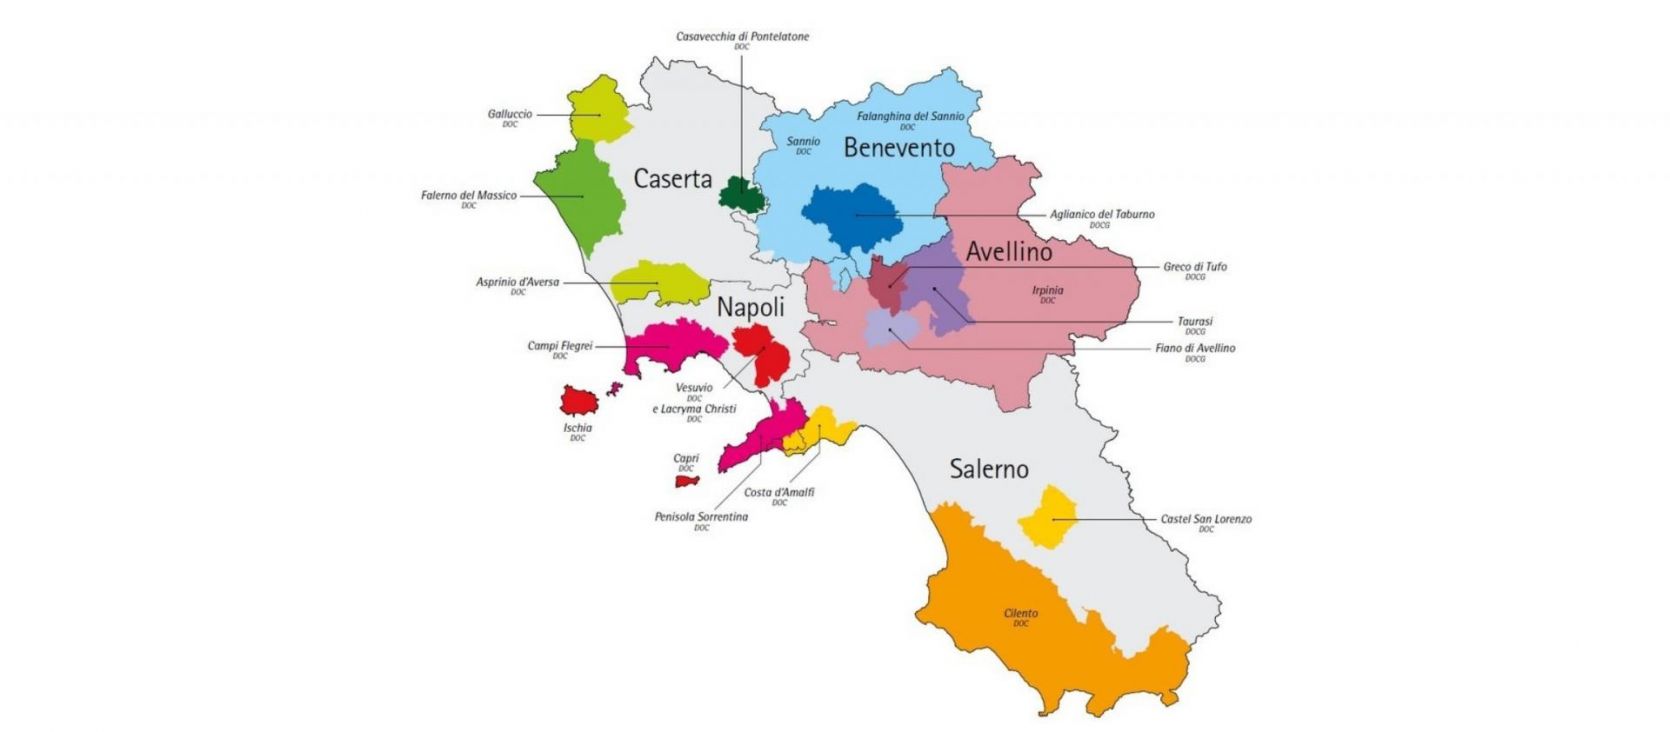 Photo for: Campania's Wine Renaissance: A Journey of Increasing Quality and Identity, a Spotlight on Falanghina